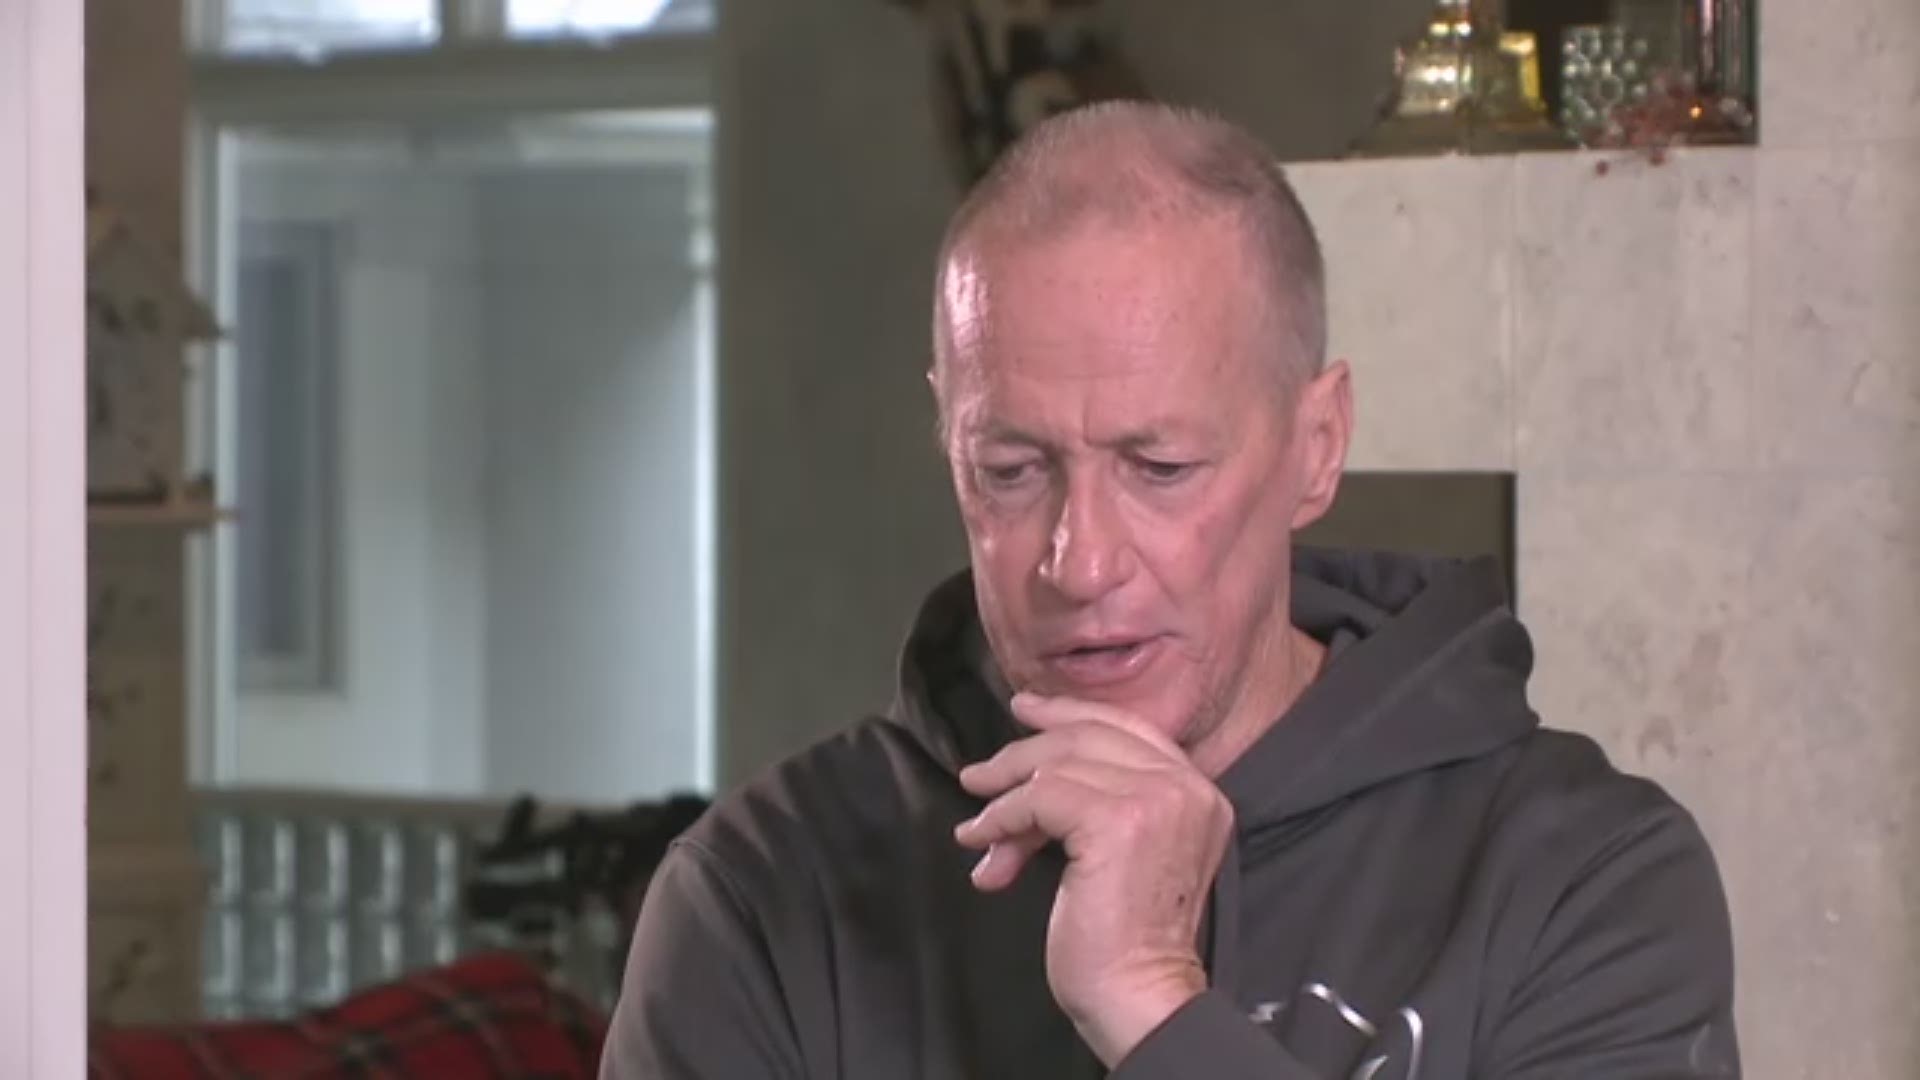 Here is an exteded version of Adam Benigni's interview with Jim Kelly.